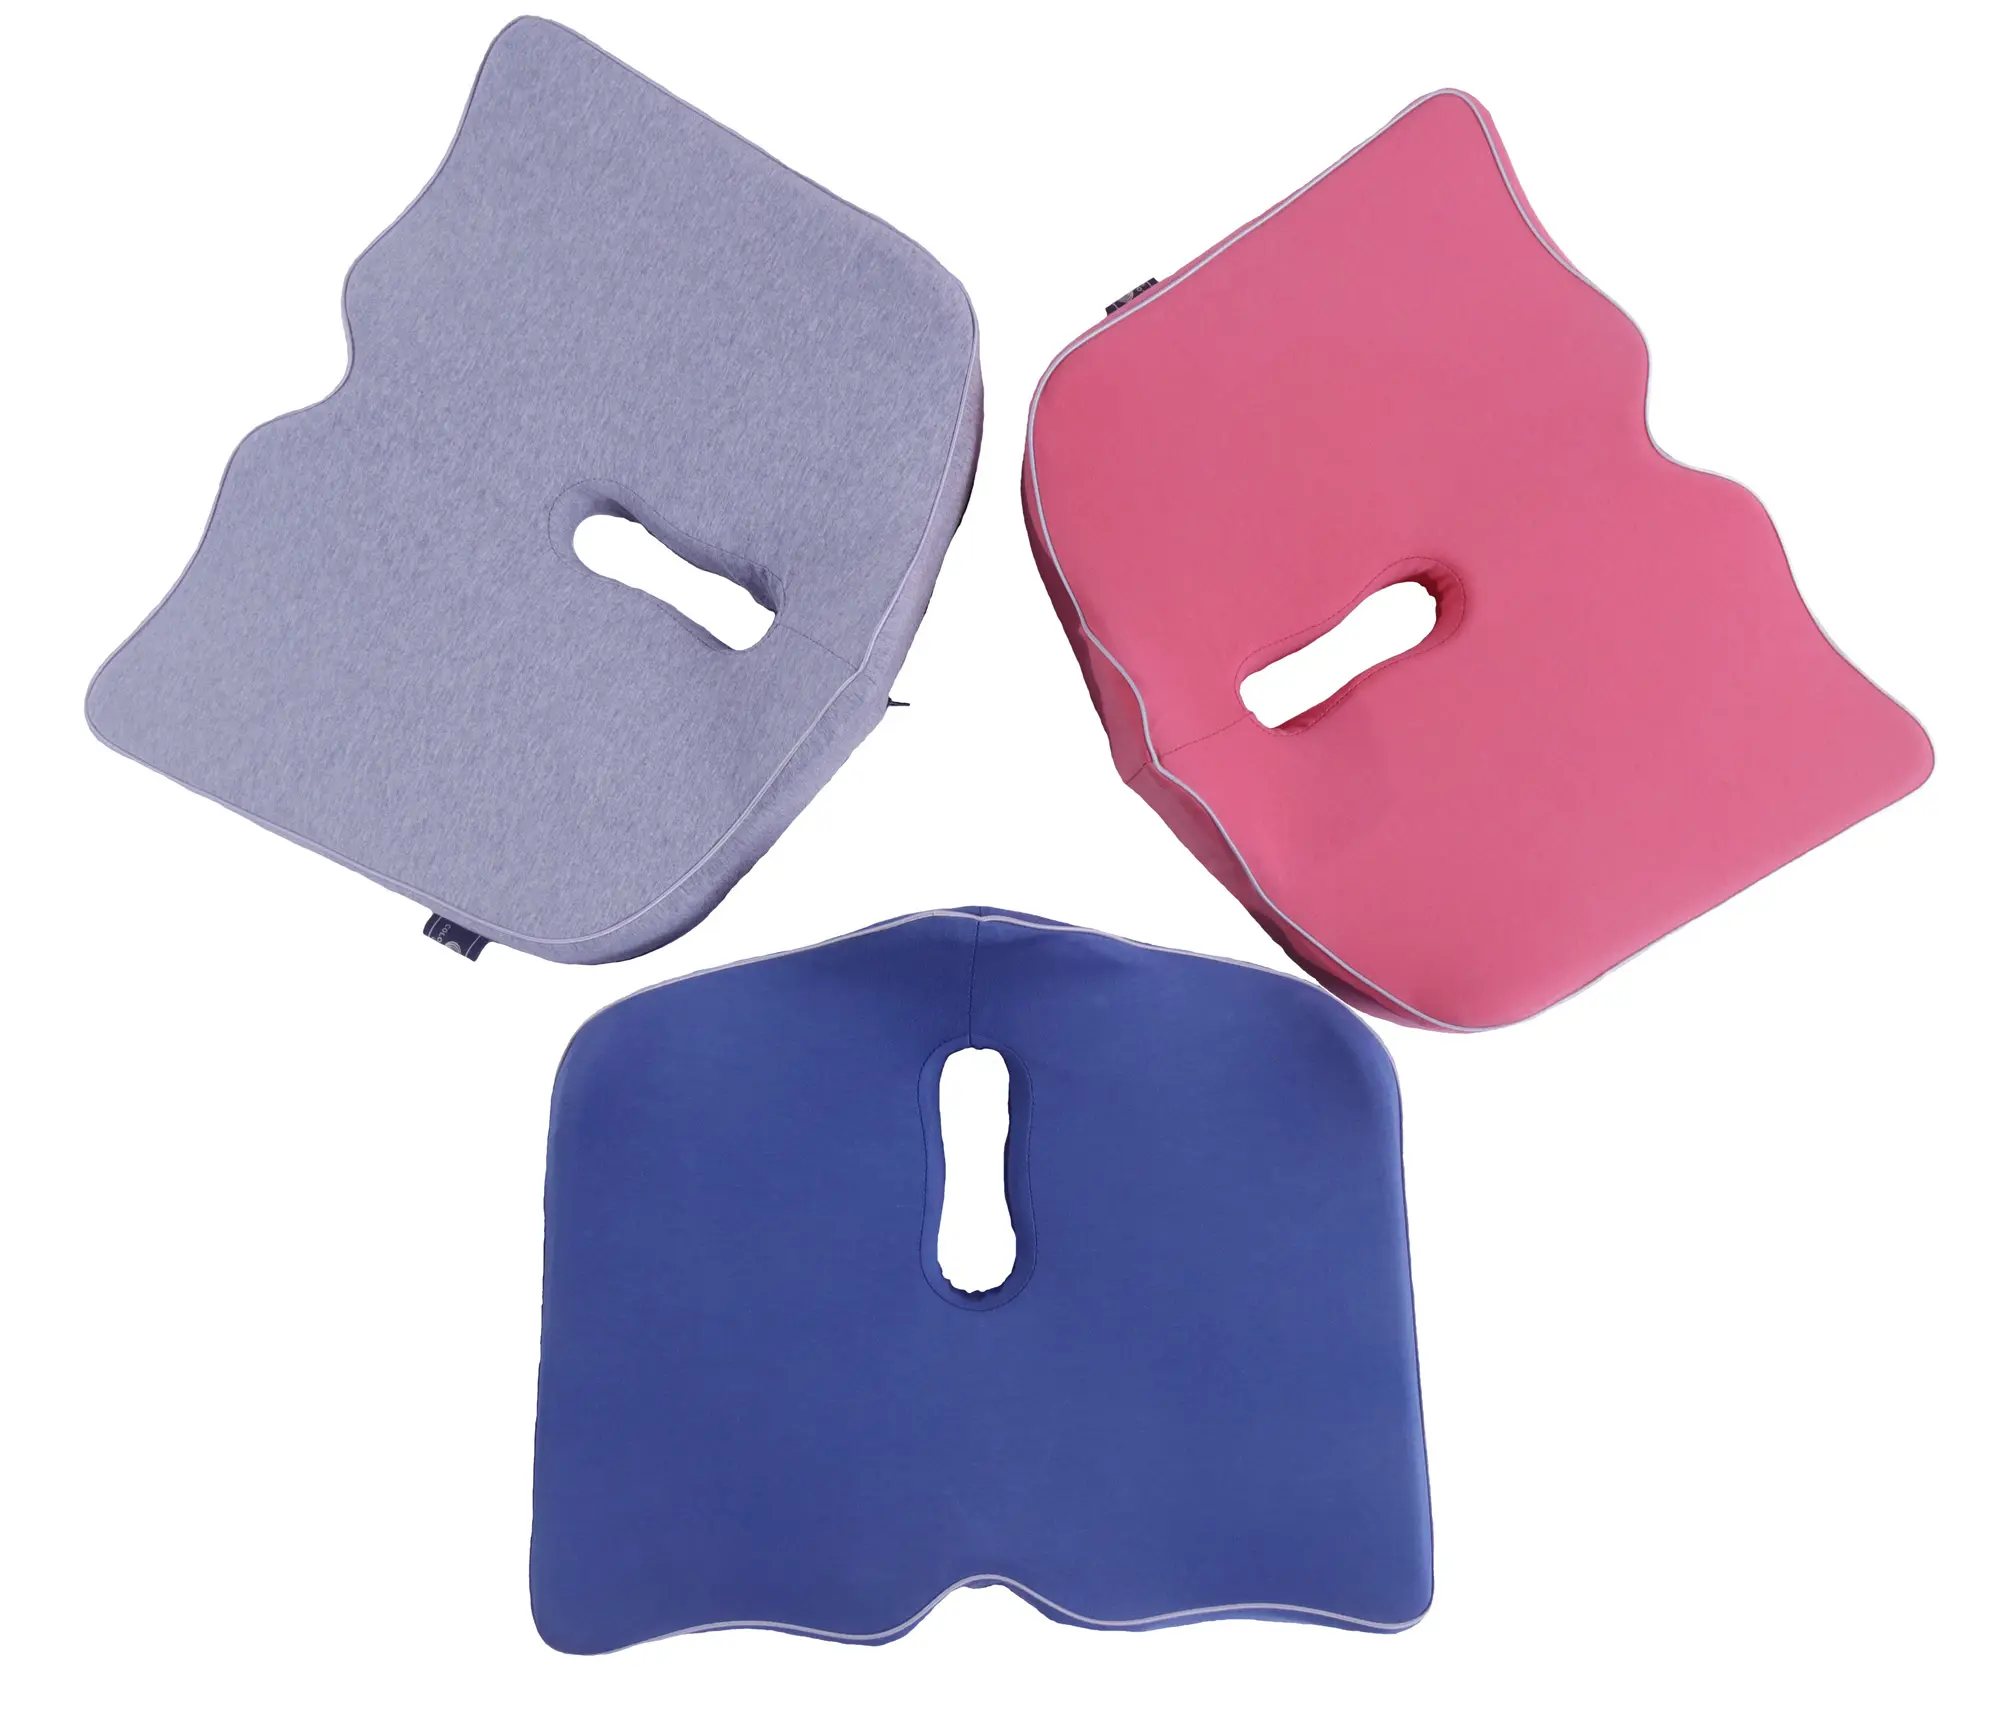 Hot-selling New Style Orthopedic Memory Foam Car Seat Pad for Posture Sciatica Pain Relief Cushion Pillow, Office Chair Cushion